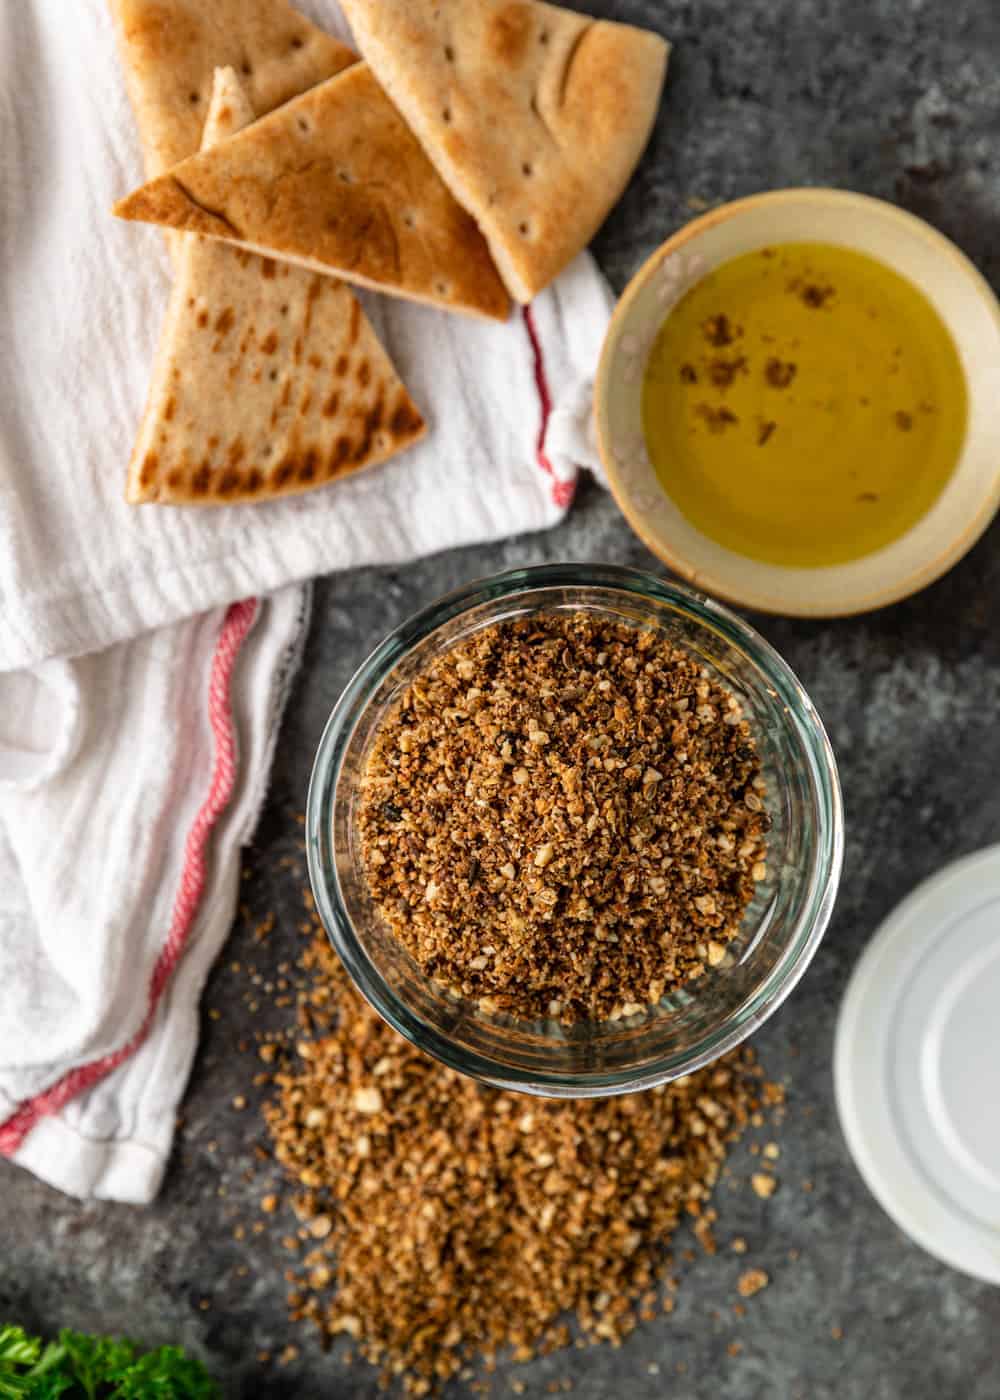 overhead image: bowl of homemade spice blend made from toasted almonds, seeds, and spices next to pita bread and dipping sauce